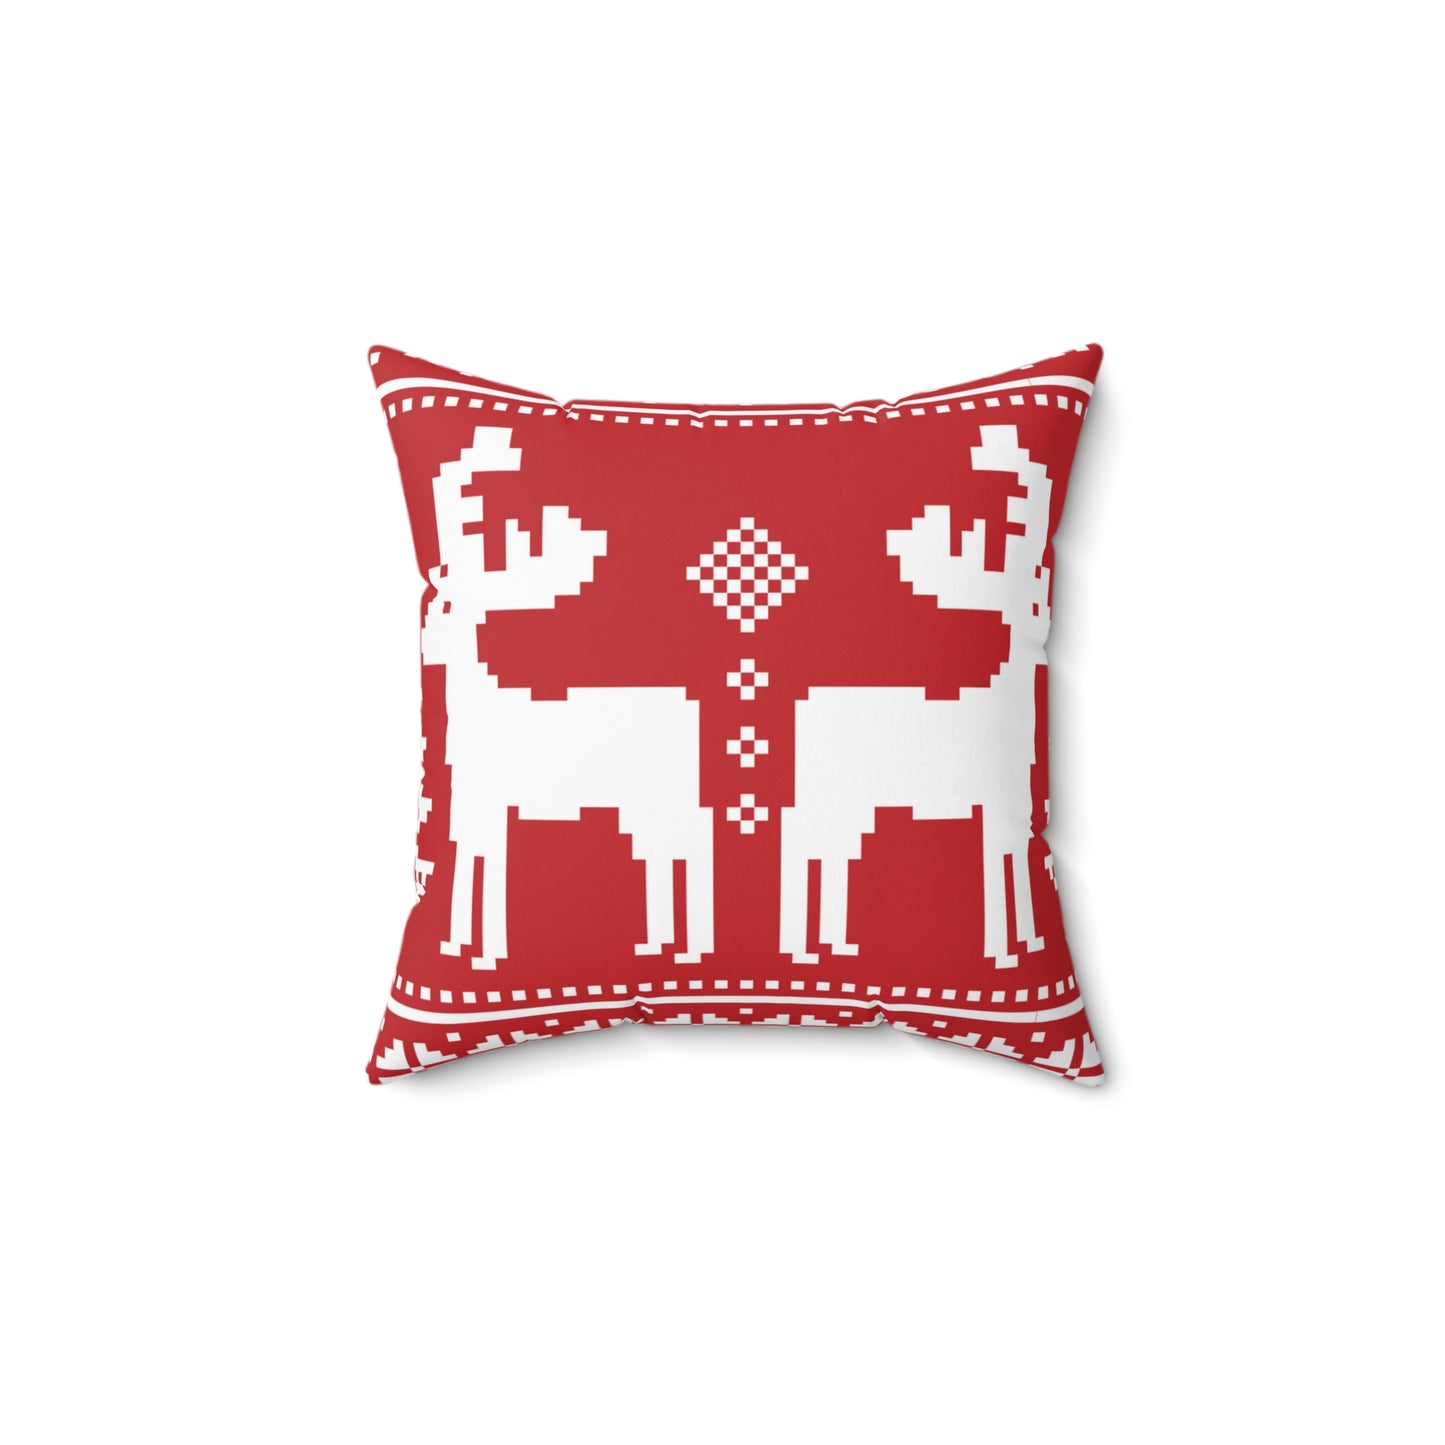 Sweater Weather Square Pillow